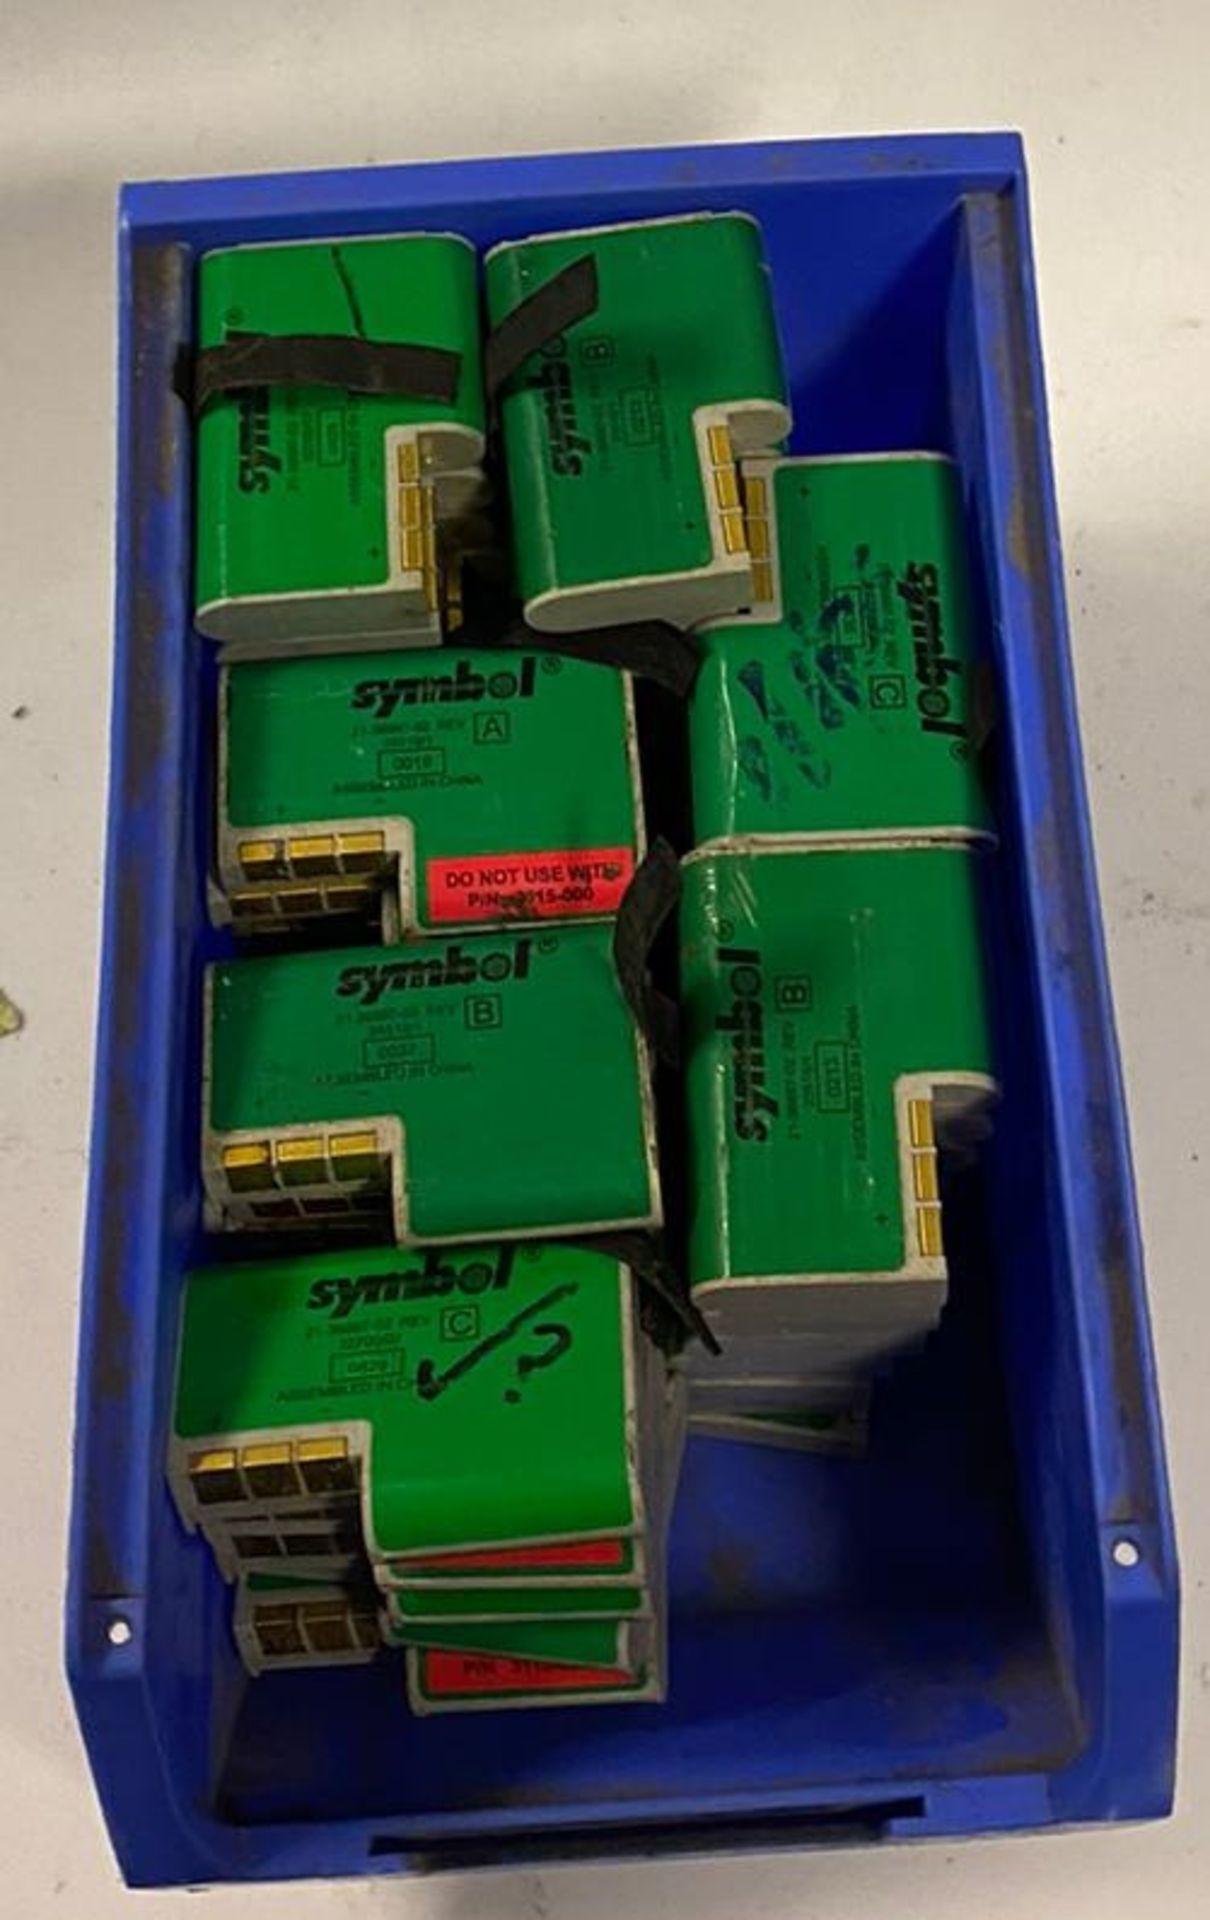 10 x Symbol 21-36897-02 Rechargeable 6.0V Batteries - Used Condition - Location: Altrincham WA14 - - Image 4 of 5